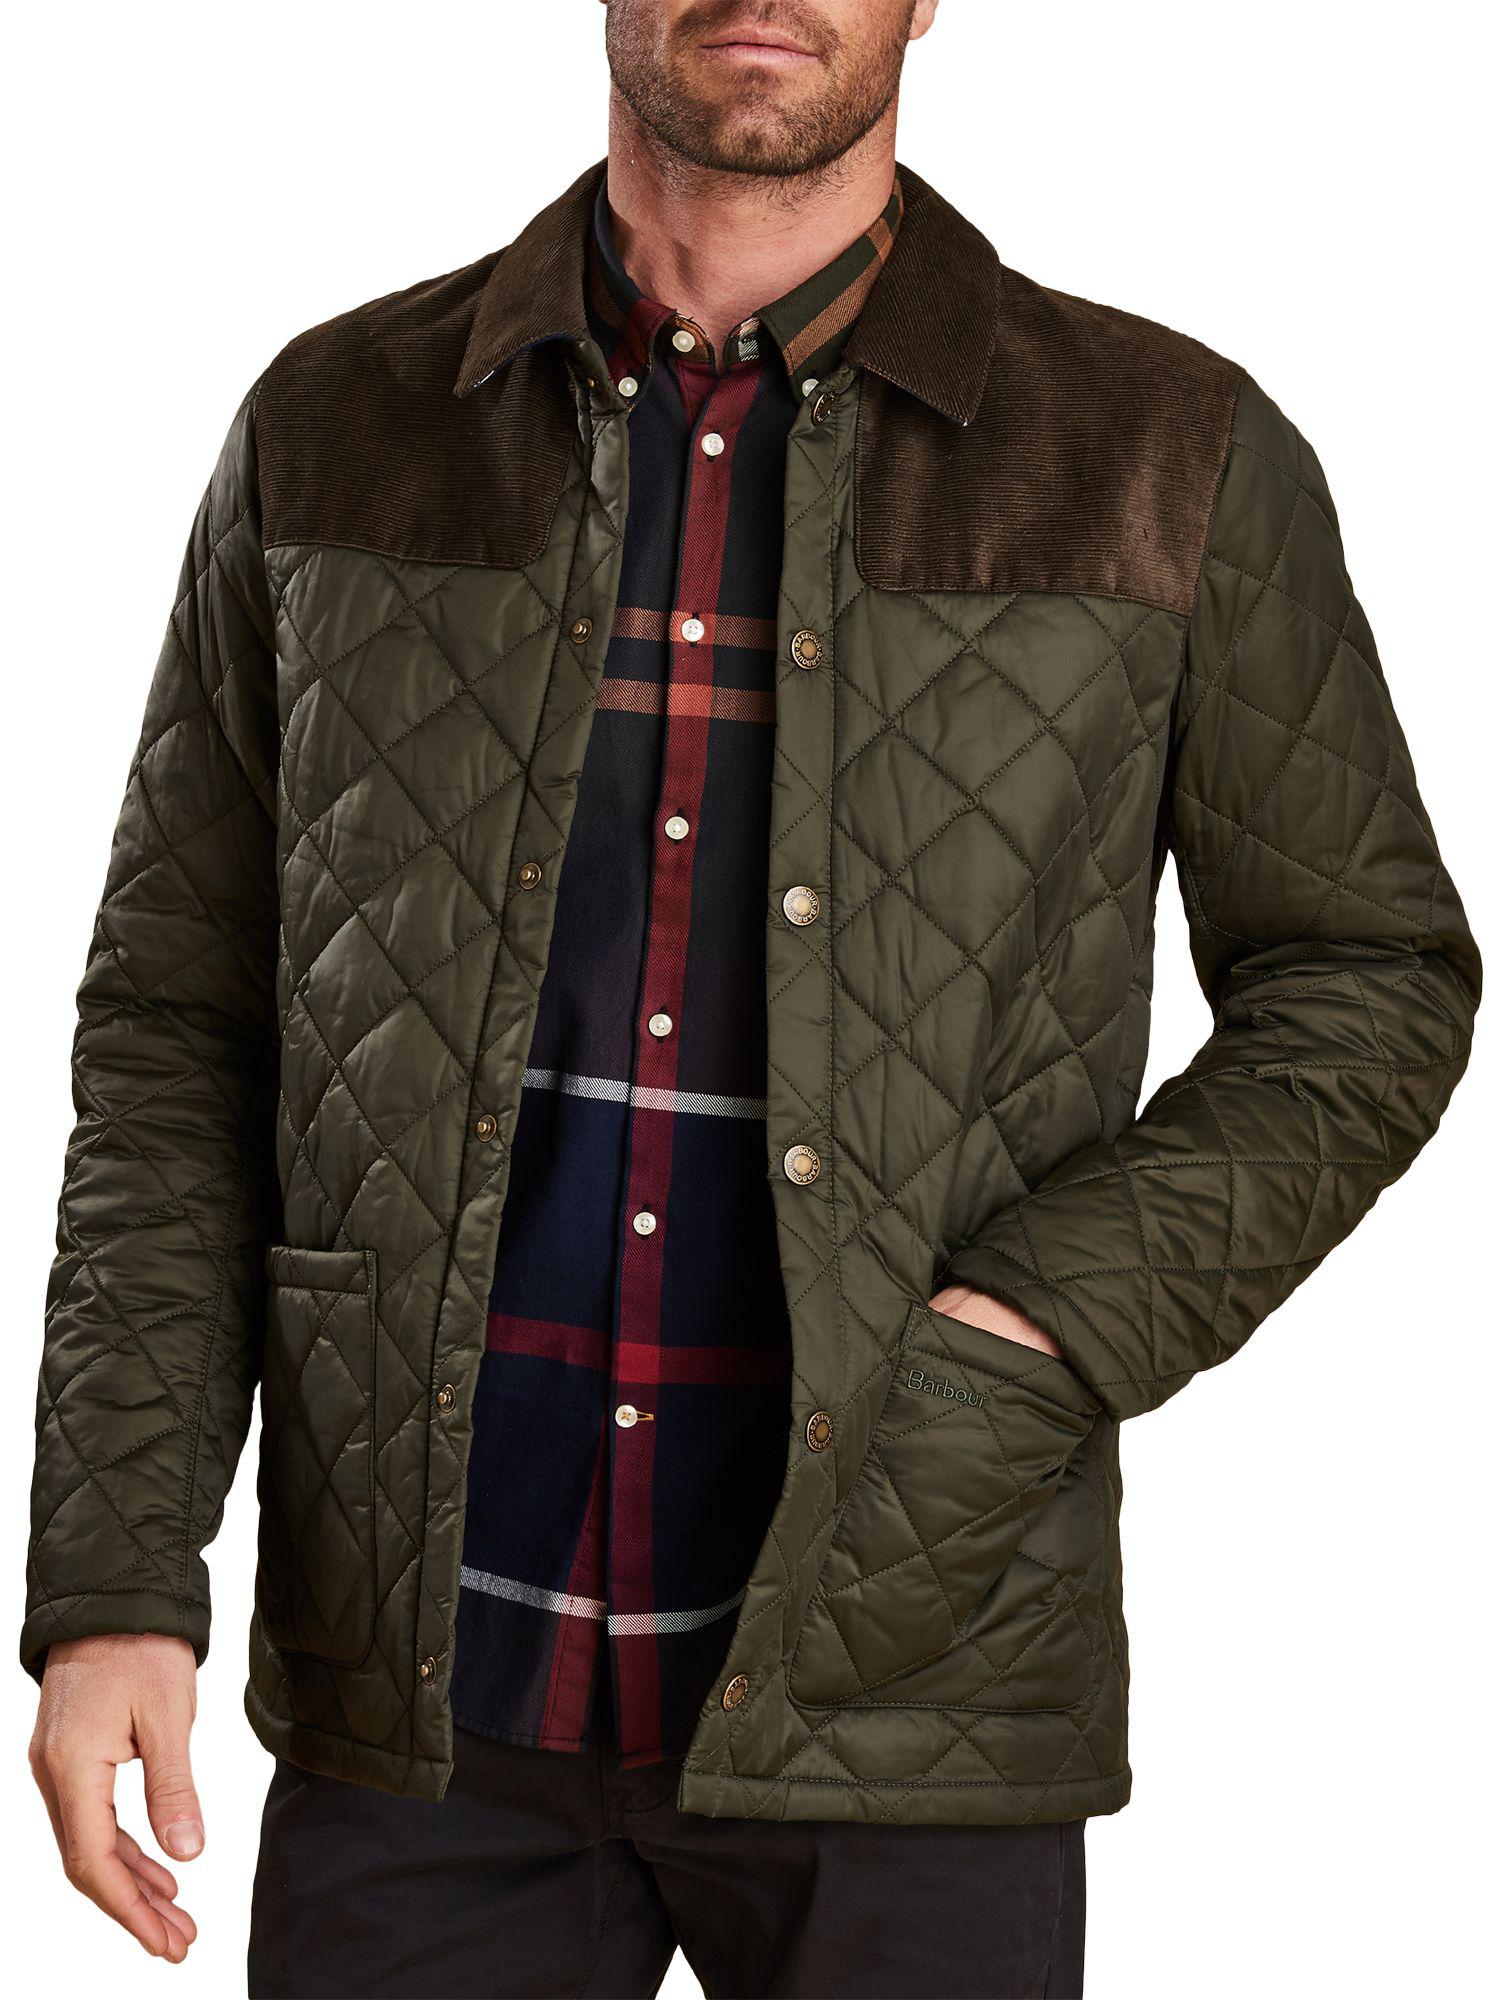 Barbour Corduroy Gillock Quilted Jacket in Green for Men - Lyst